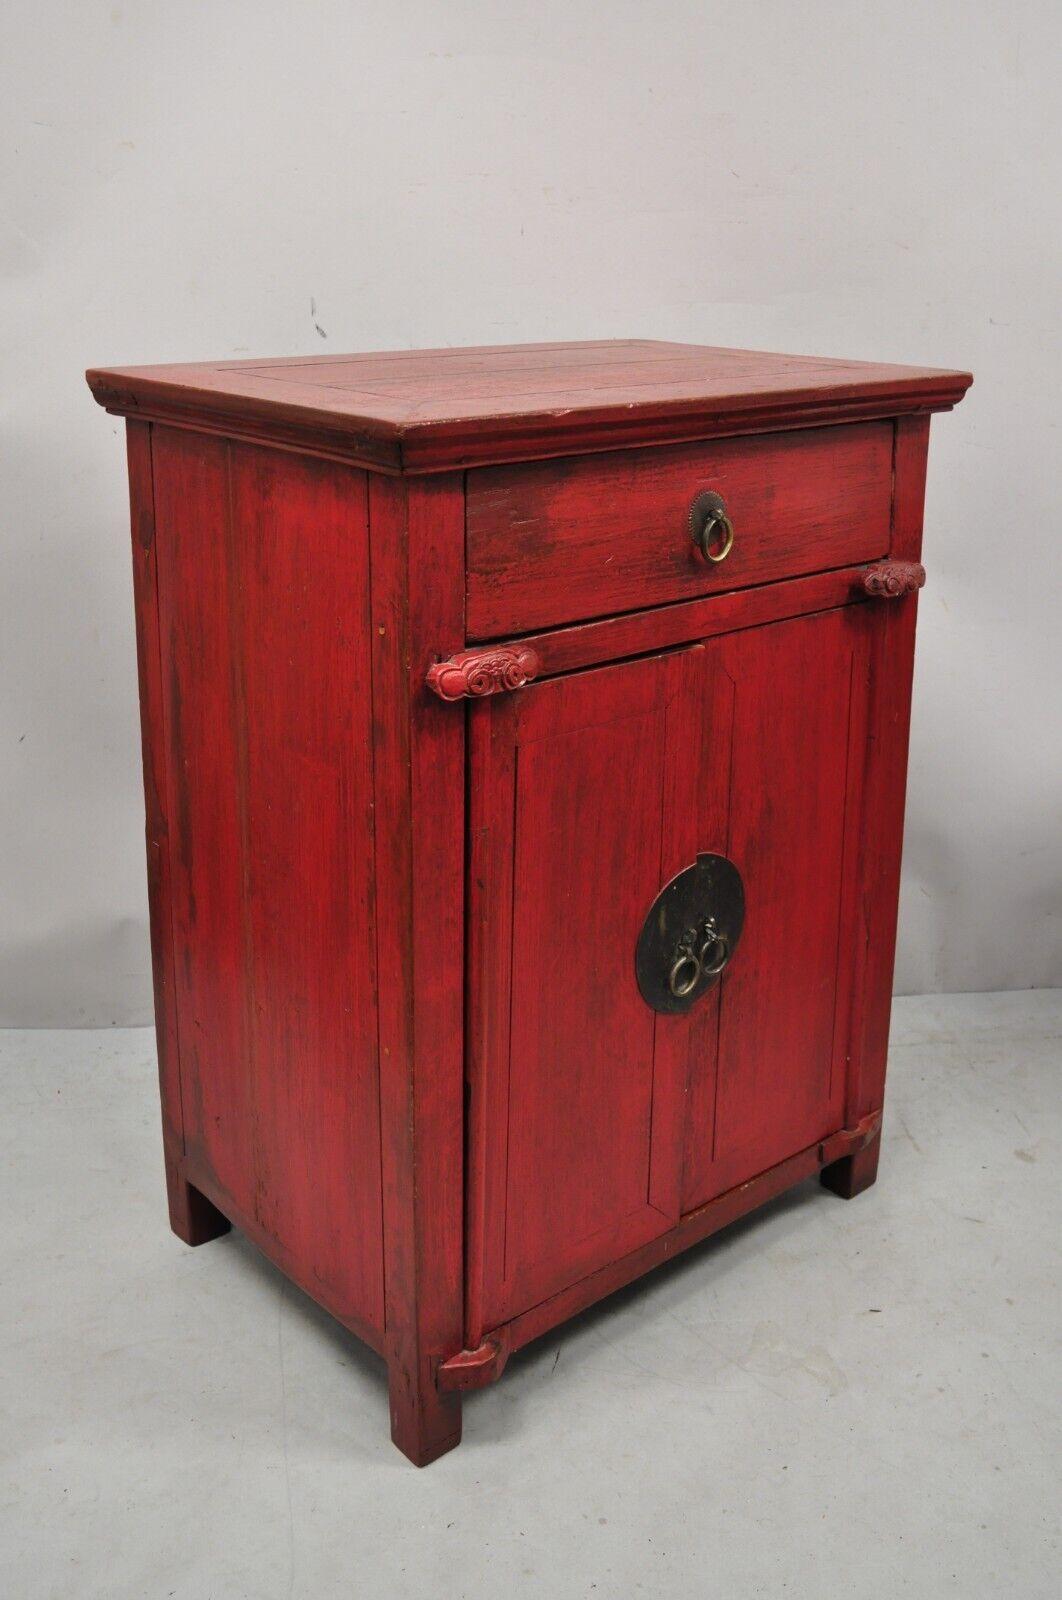 Vintage Chinese red lacquered cabinet cupboard with drawer and swing doors. Item features solid wood construction, red painted distressed finish, 2 swing doors, 1 dovetailed drawer, very nice vintage item, great style and form. Item features late